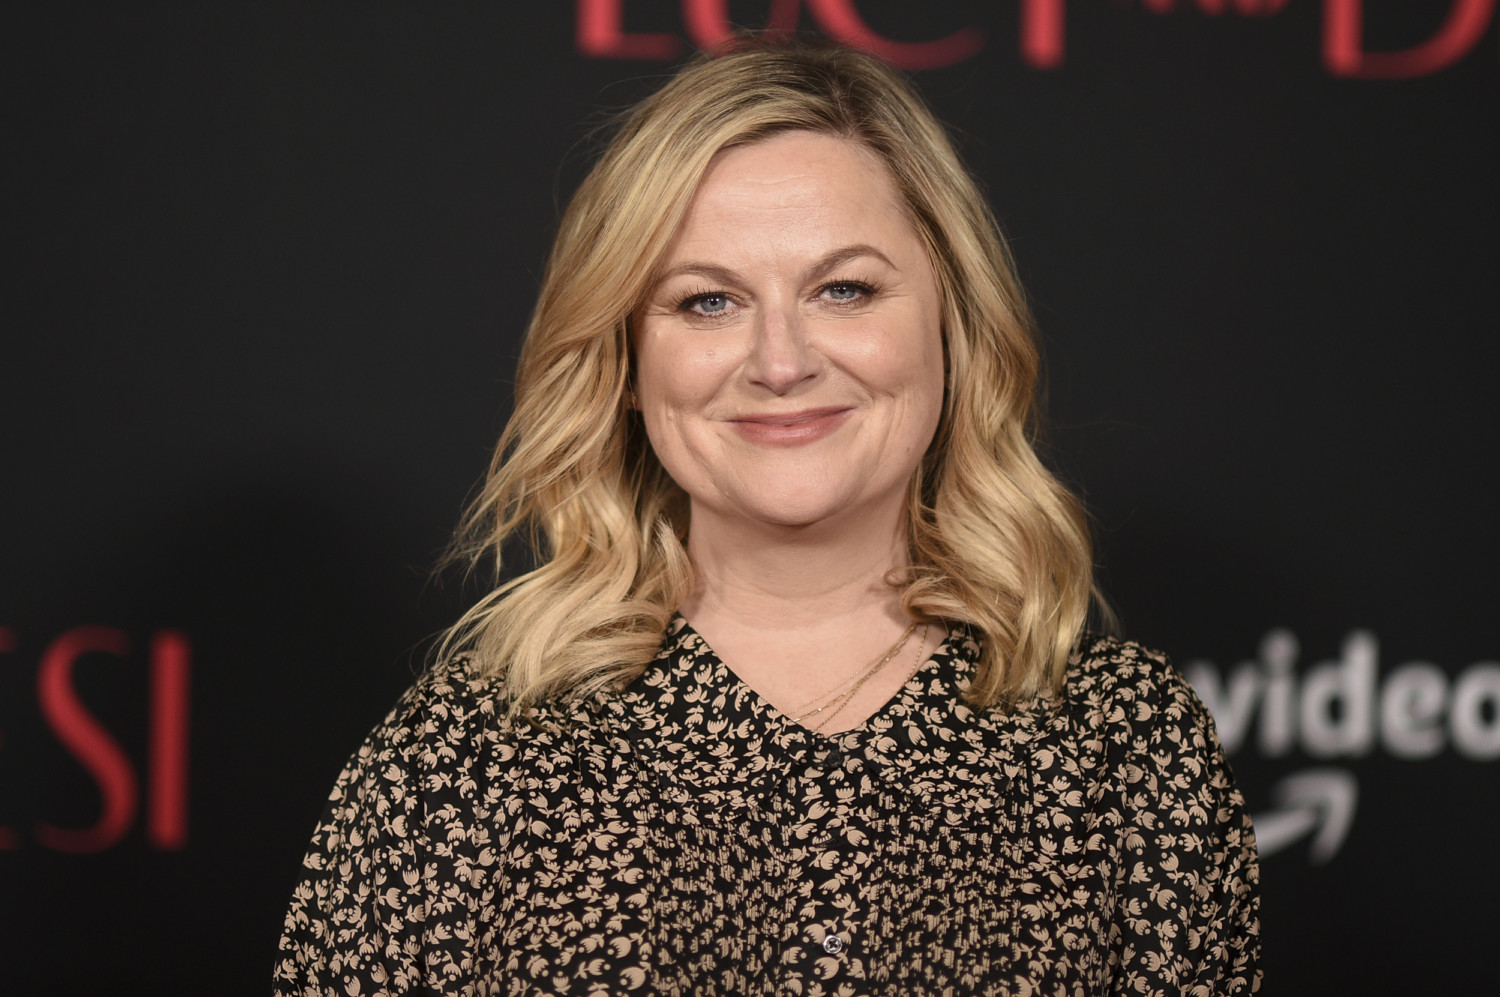 Amy Poehler at premiere of "Lucy & Desi"